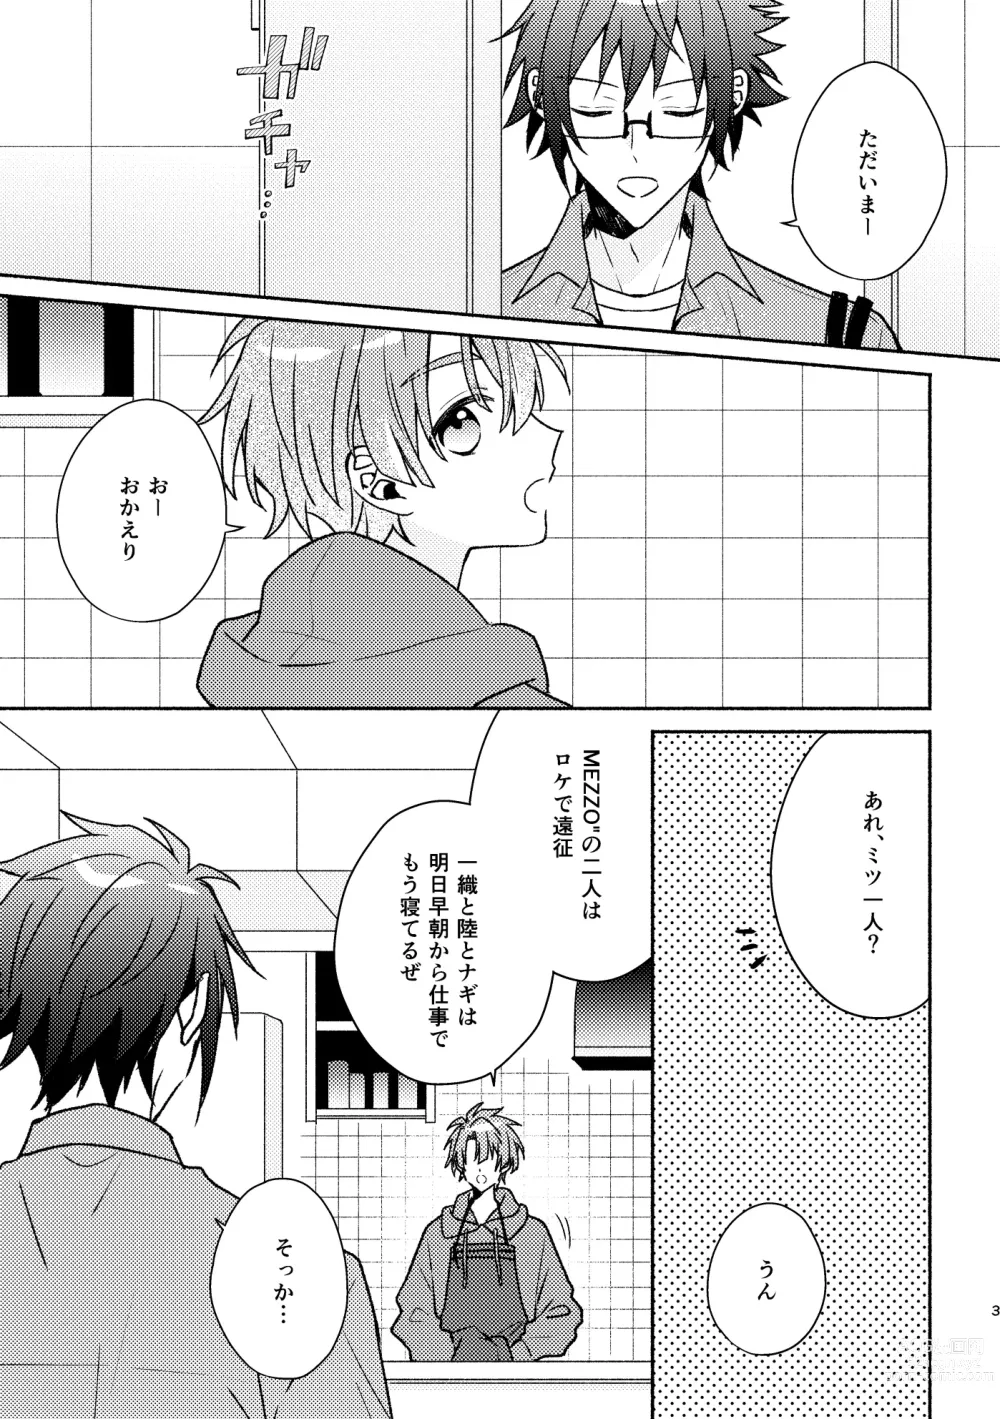 Page 2 of doujinshi Secret Expectations